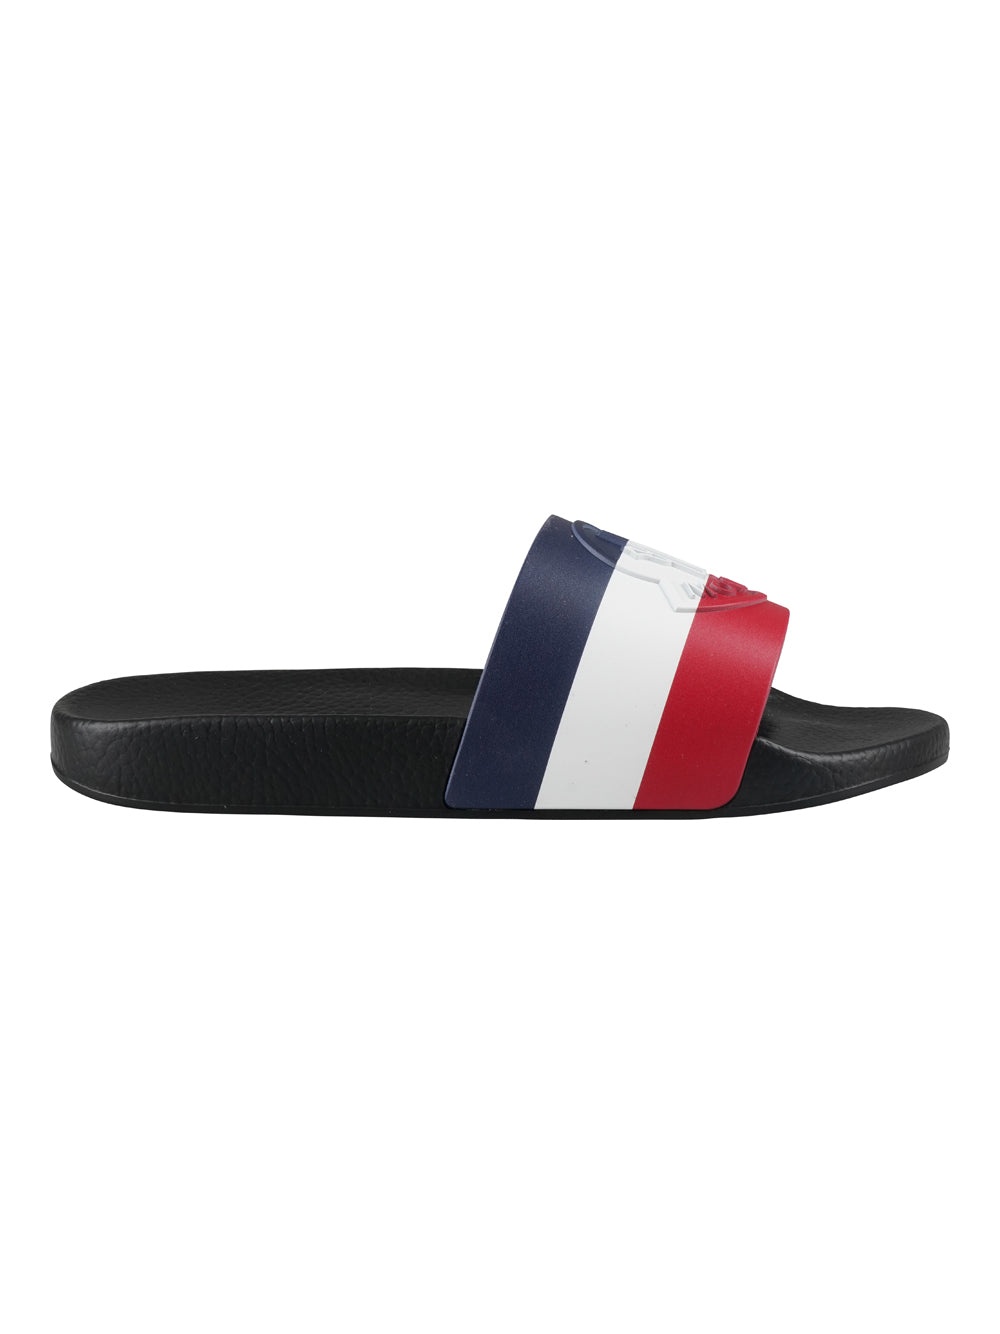 MONCLER MULTICOLOR SLIPPERS - 7